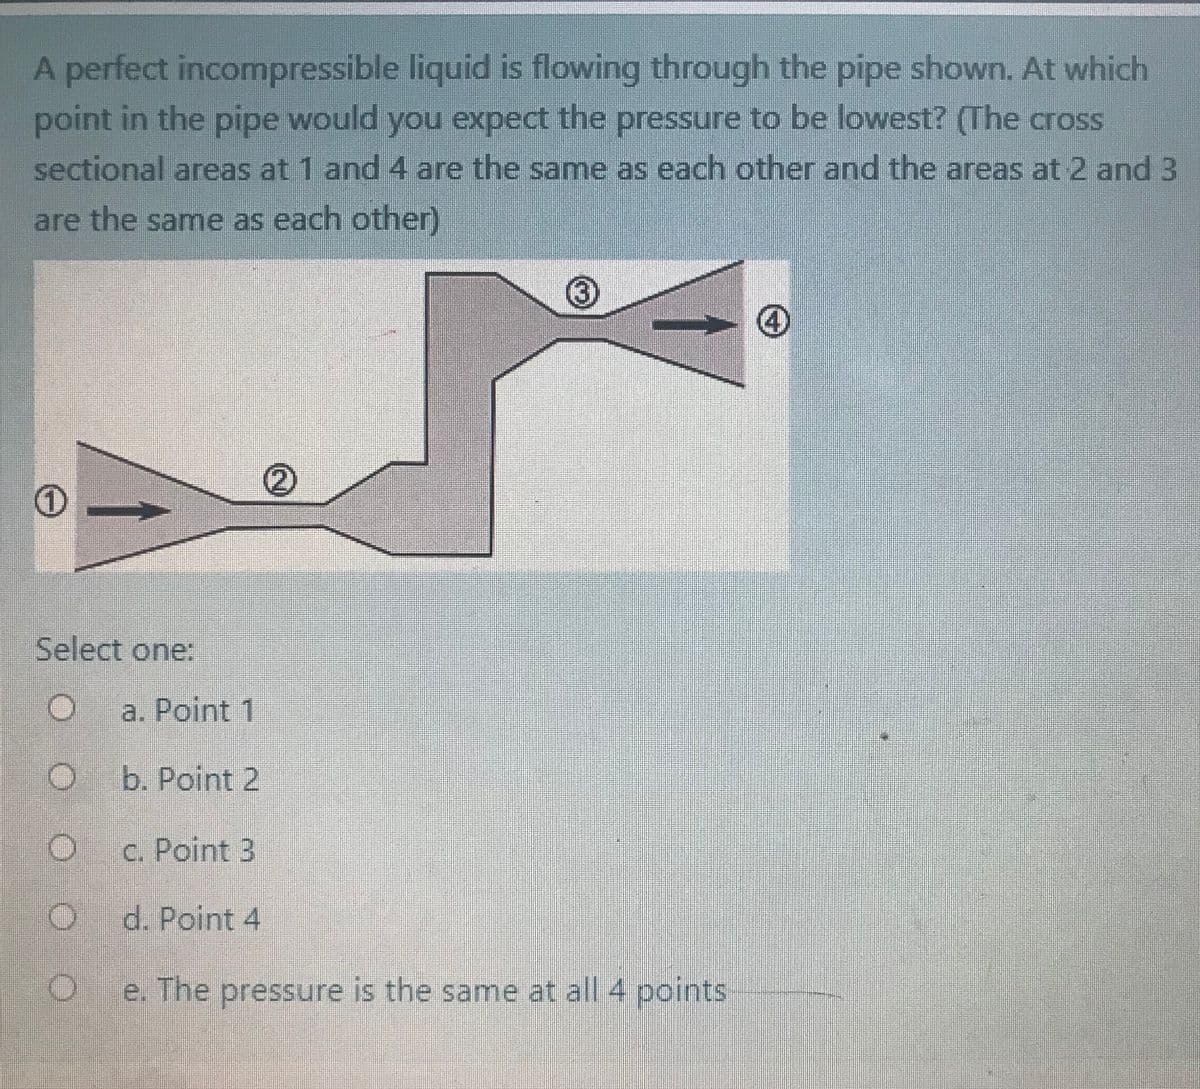 A perfect incompressible liquid is flowing through the pipe shown. At which
point in the pipe would you expect the pressure to be lowest? (The cross
sectional areas at 1 and 4 are the same as each other and the areas at 2 and 3
are the same as each other)
Select one:
a. Point 1
b. Point 2
c. Point 3
d. Point 4
e. The pressure is the same at all 4 points
